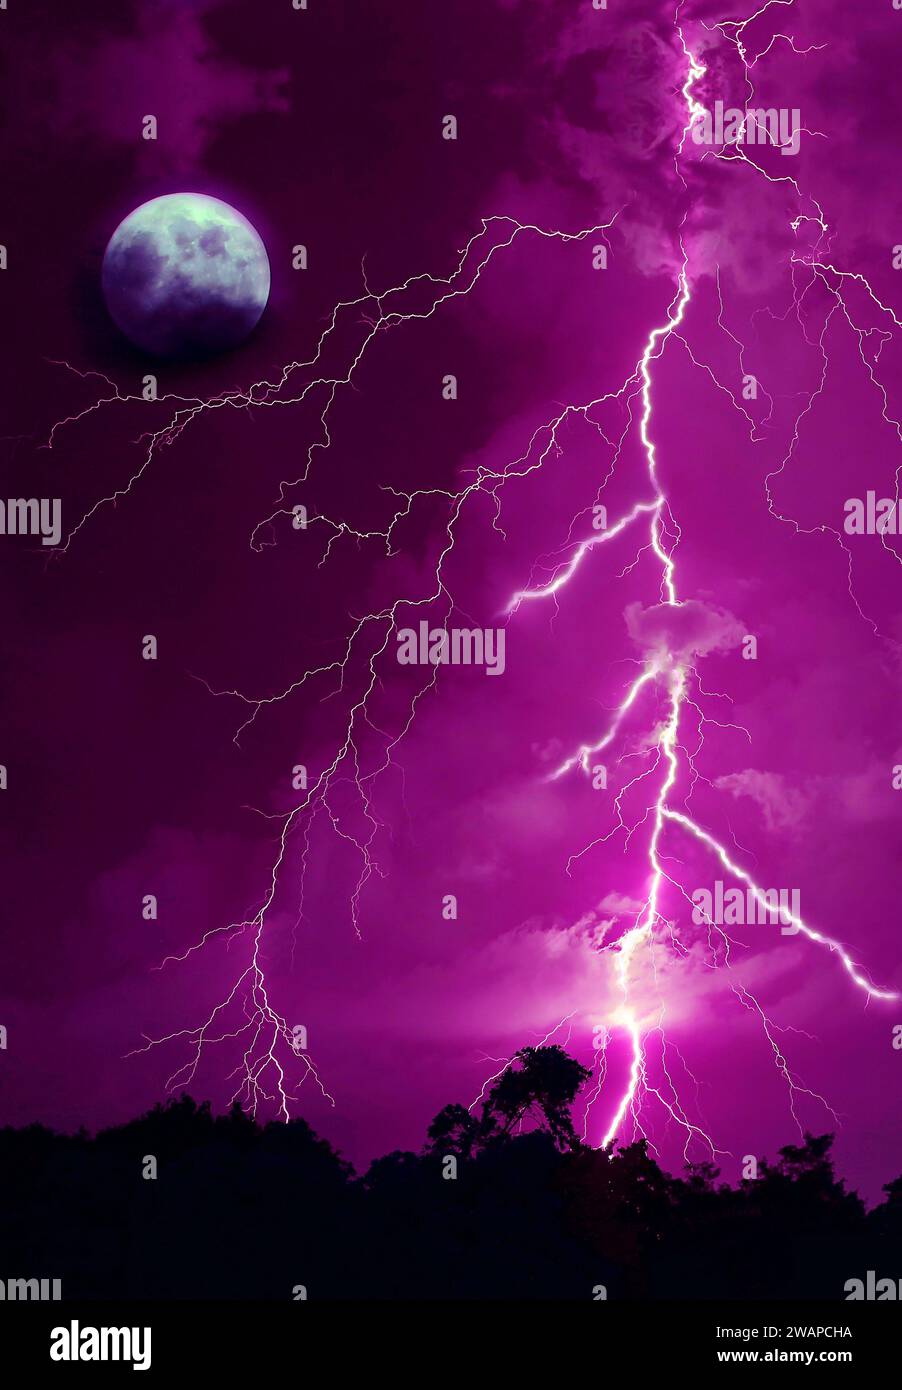 Pop Art Surreal Style of Stunning Lightning Strikes in Deep Purple Night Sky with a Spooky Full Moon Stock Photo